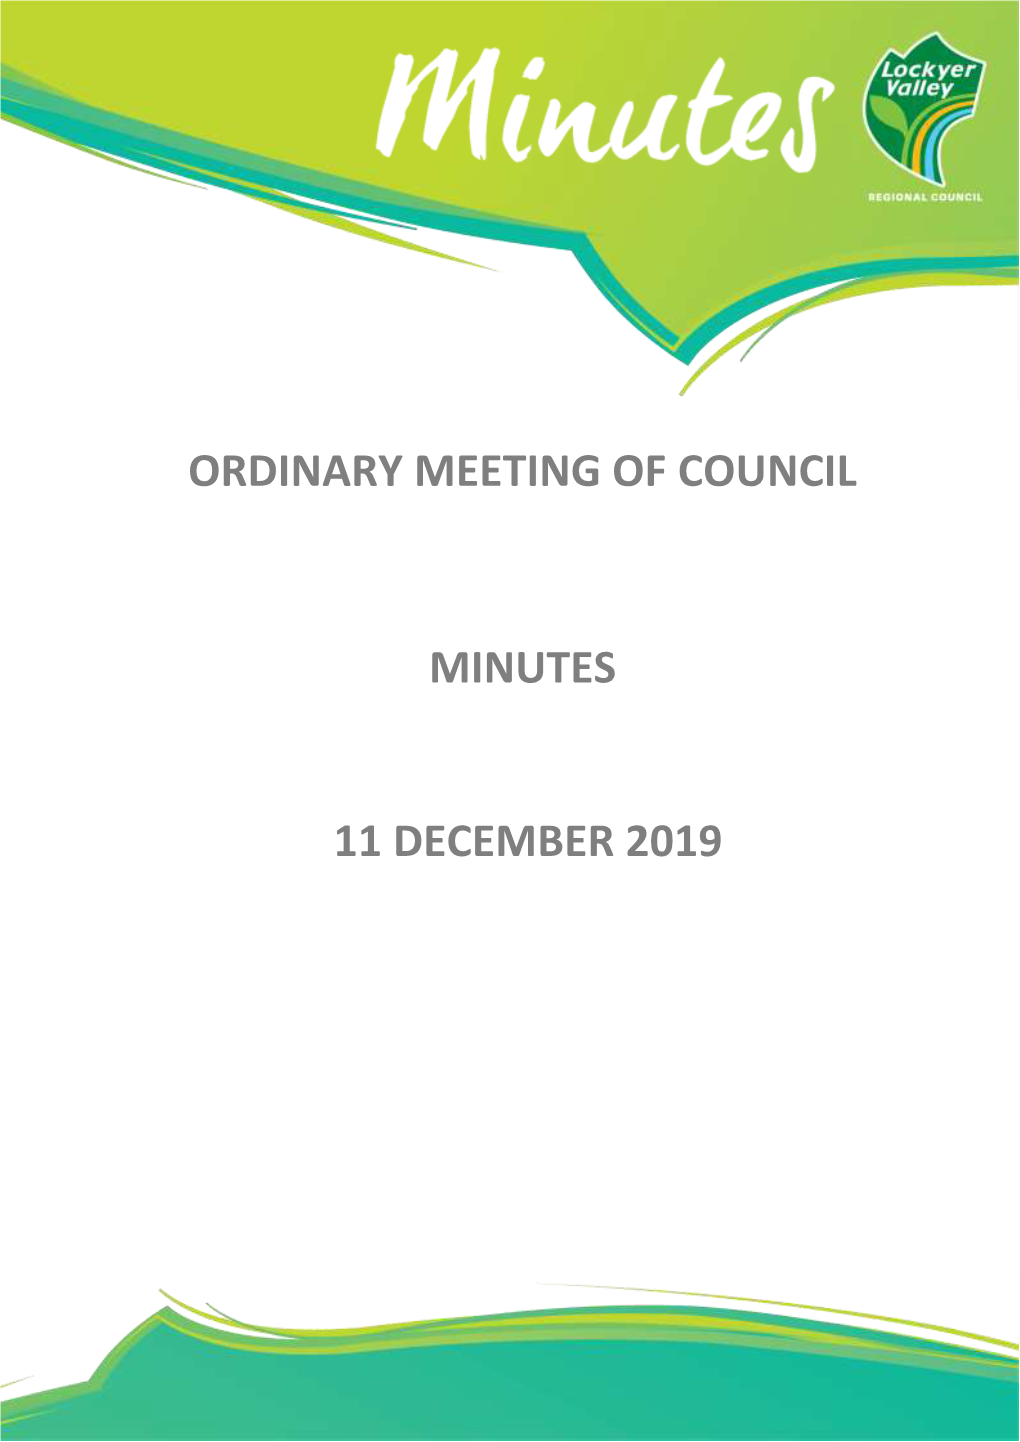 Ordinary Meeting of Council Minutes 11 December 2019